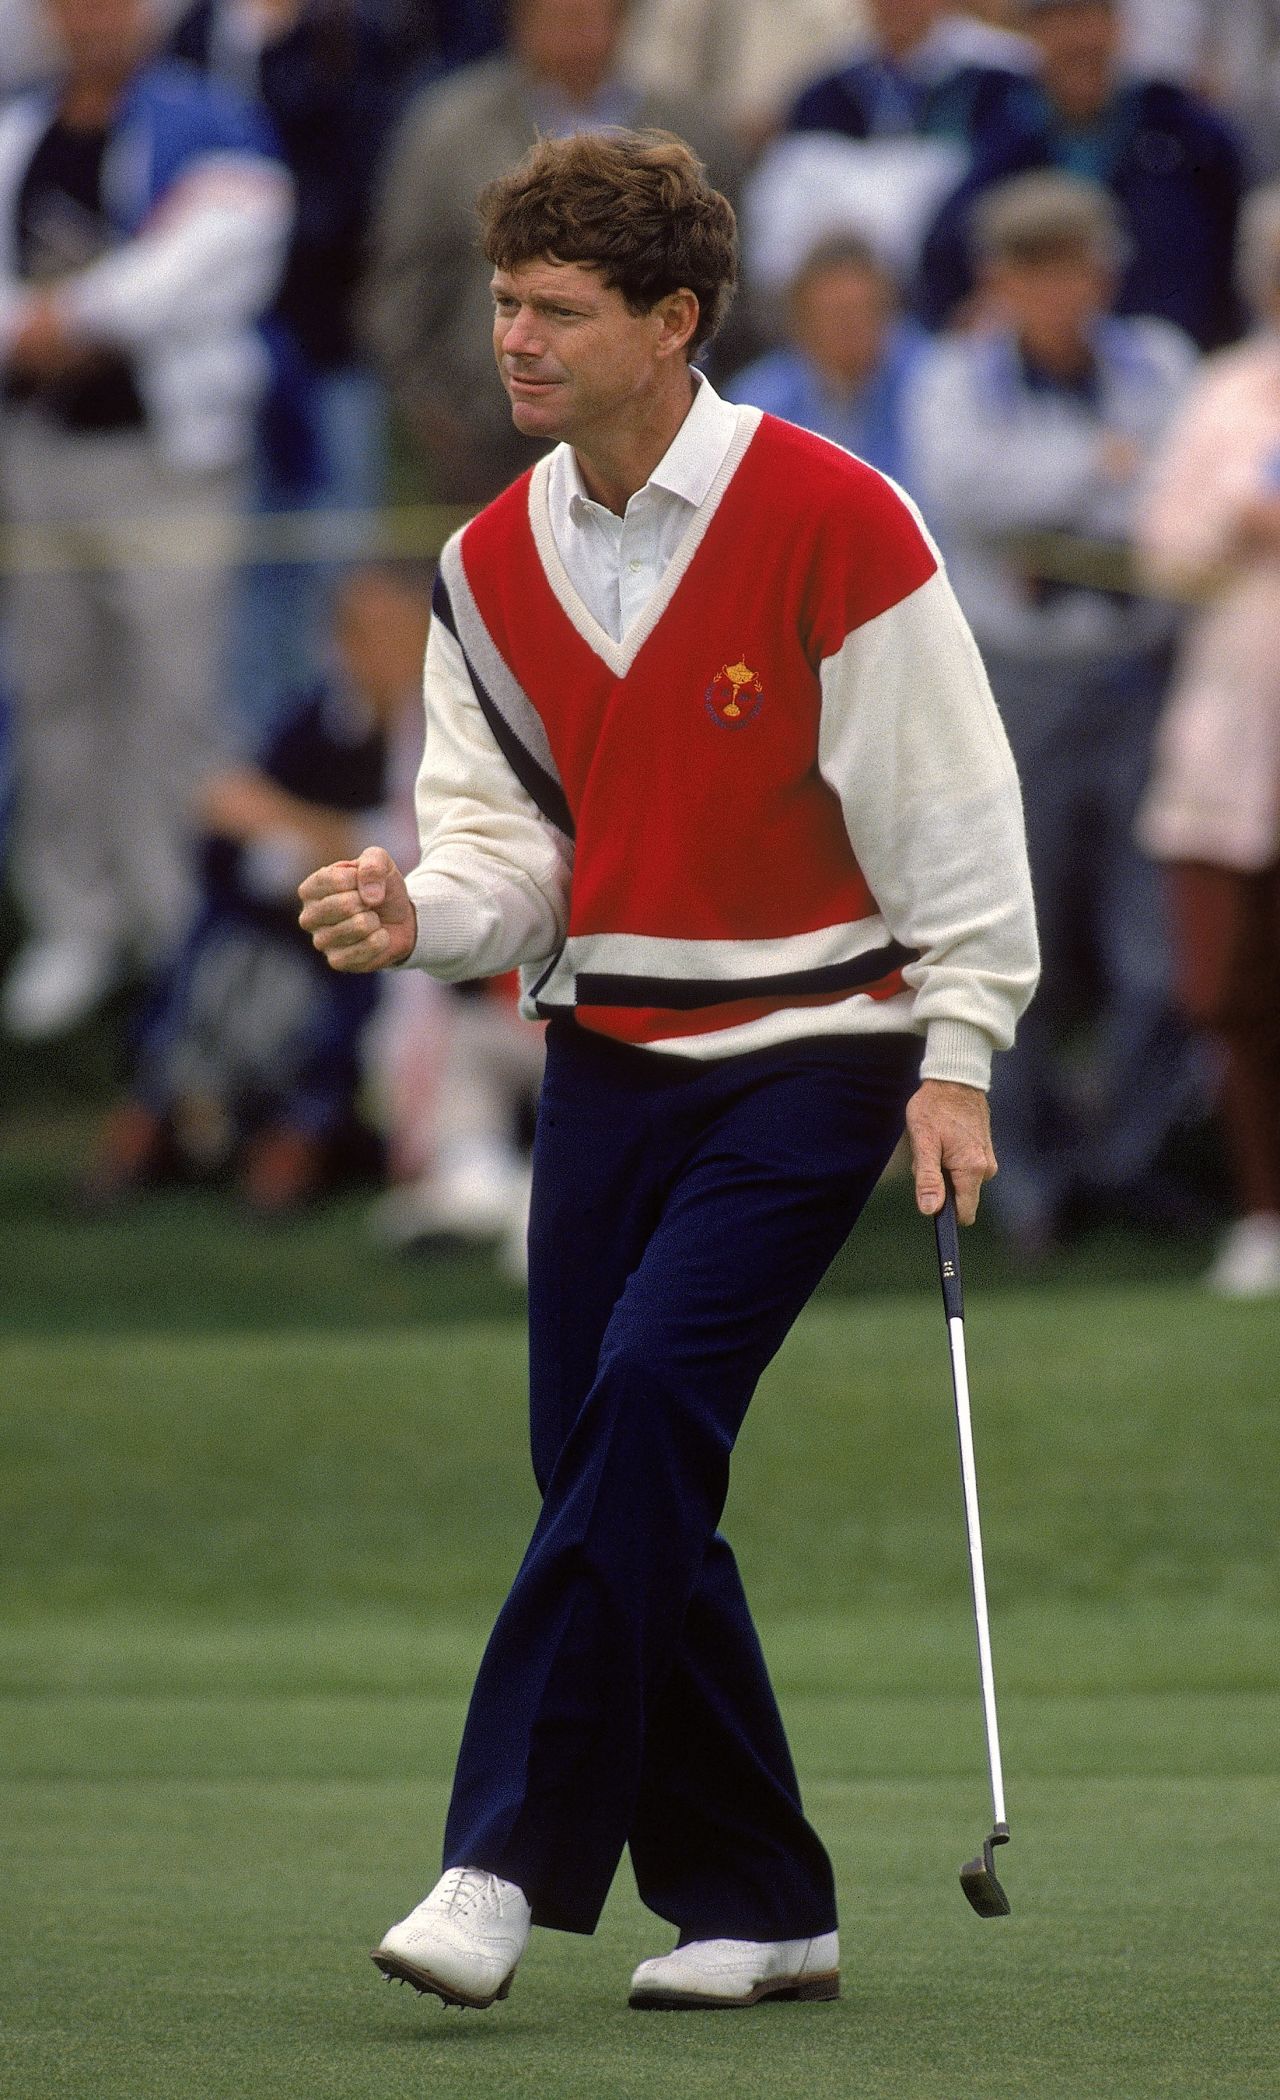 After missing the next two installments, Watson was picked by U.S. captain Raymond Floyd in 1989. He won his singles match against Sam Torrance but a 14-14 draw meant Europe retained the trophy in what was his last Ryder Cup as a player.